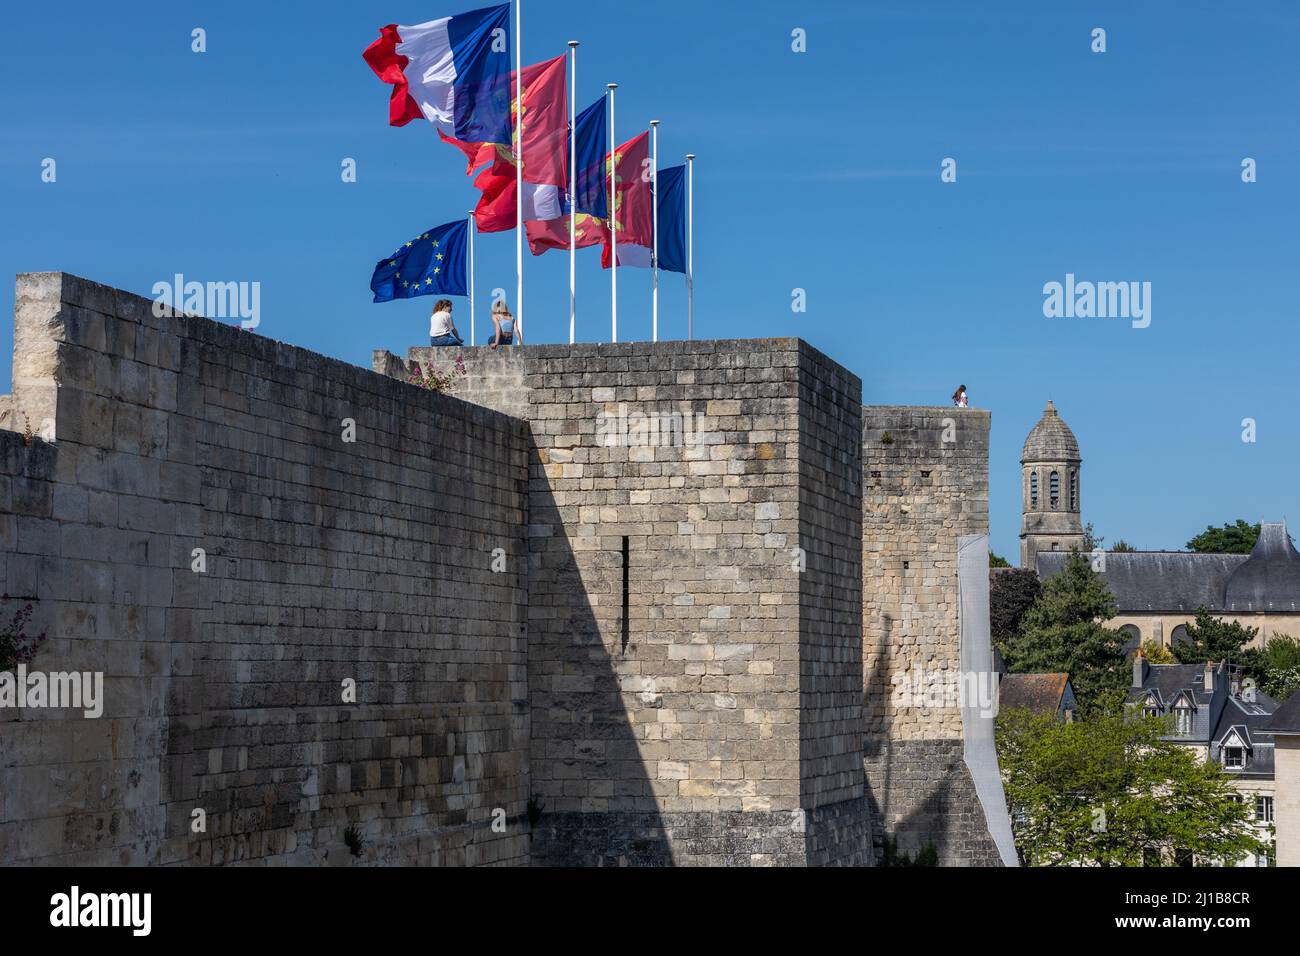 YOUNG WOMEN ON THE RAMPARTS OF THE CASTLE OF CAEN BUILT AROUND 1060 (11TH CENTURY) BY WILLIAM THE CONQUEROR, RESIDENCE OF THE DUKES OF NORMANDY, CAEN (14), NORMANDY, FRANCE Stock Photo